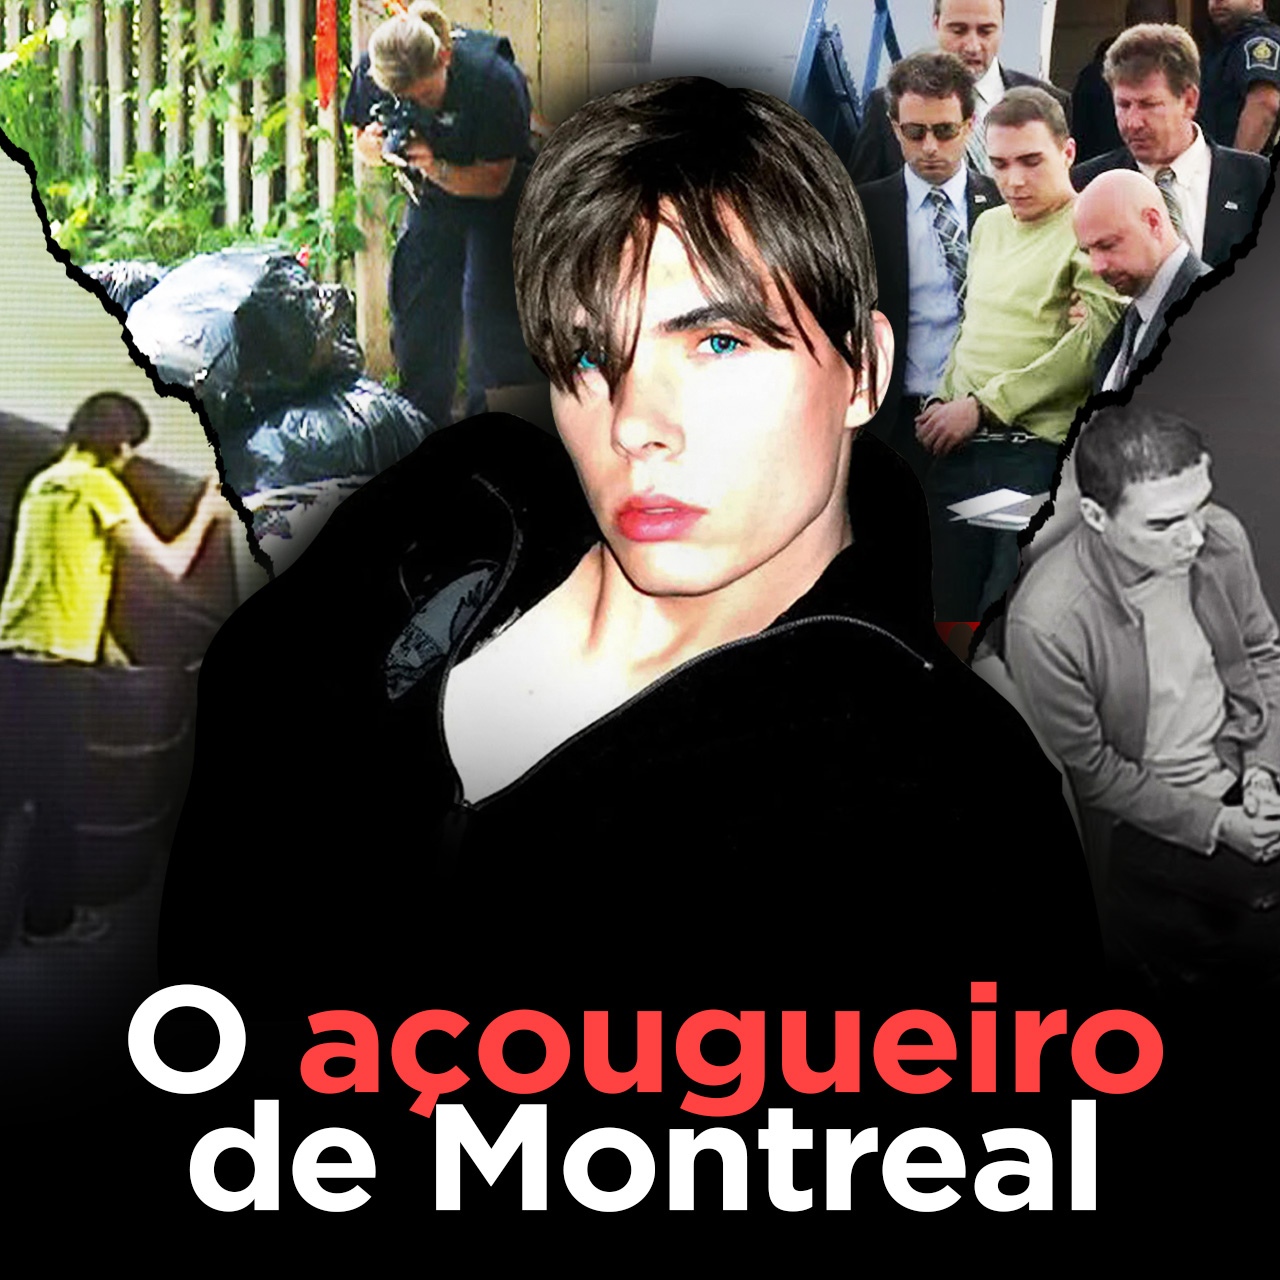 O Açougueiro de Montreal (Don't Fu ** with Cats) Luka Magnotta